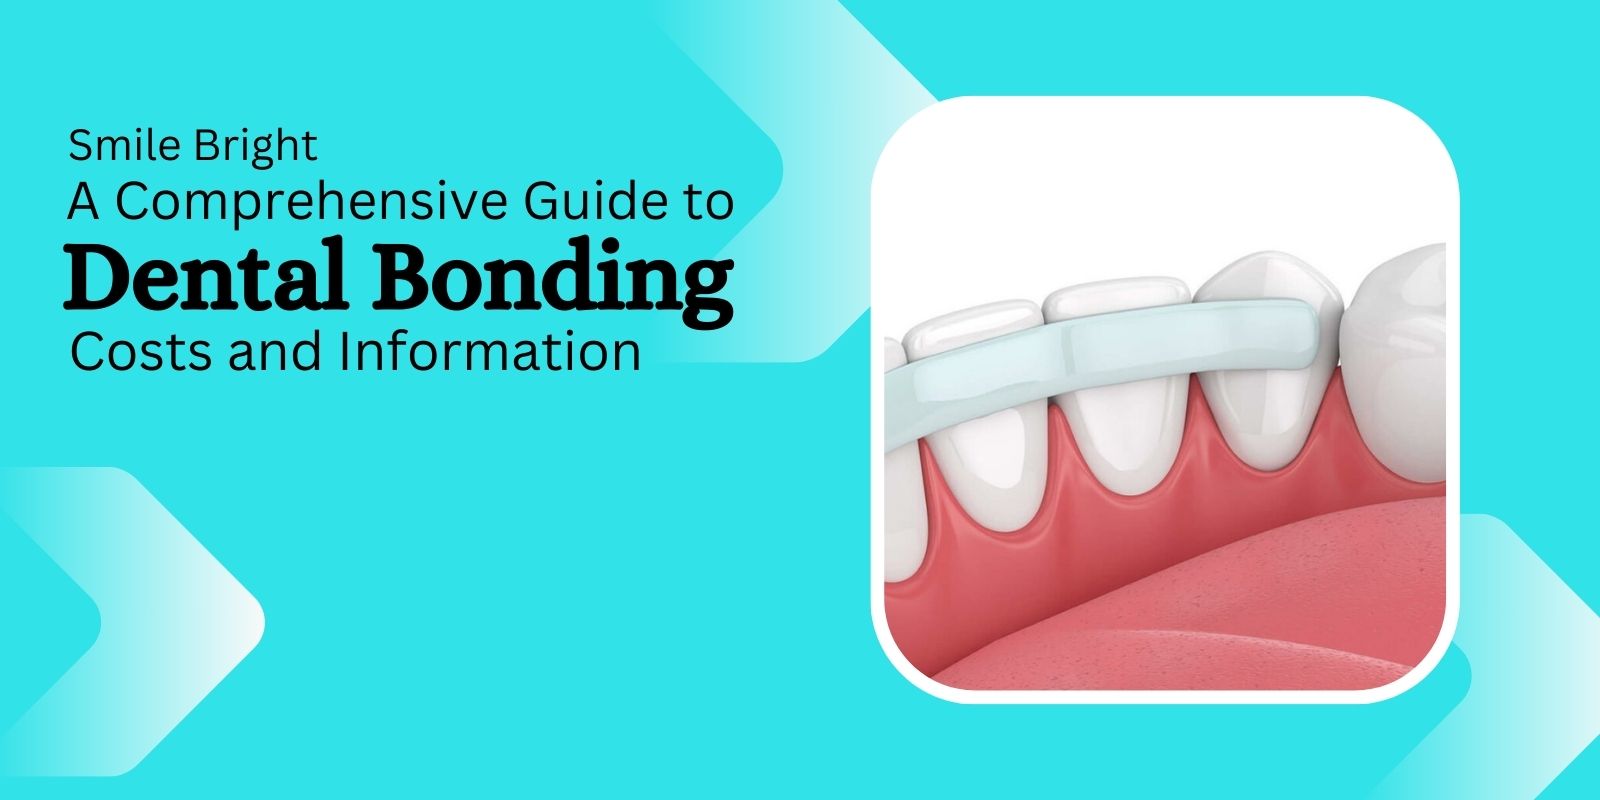 Smile Bright: A Comprehensive Guide to Dental Bonding Costs and Information